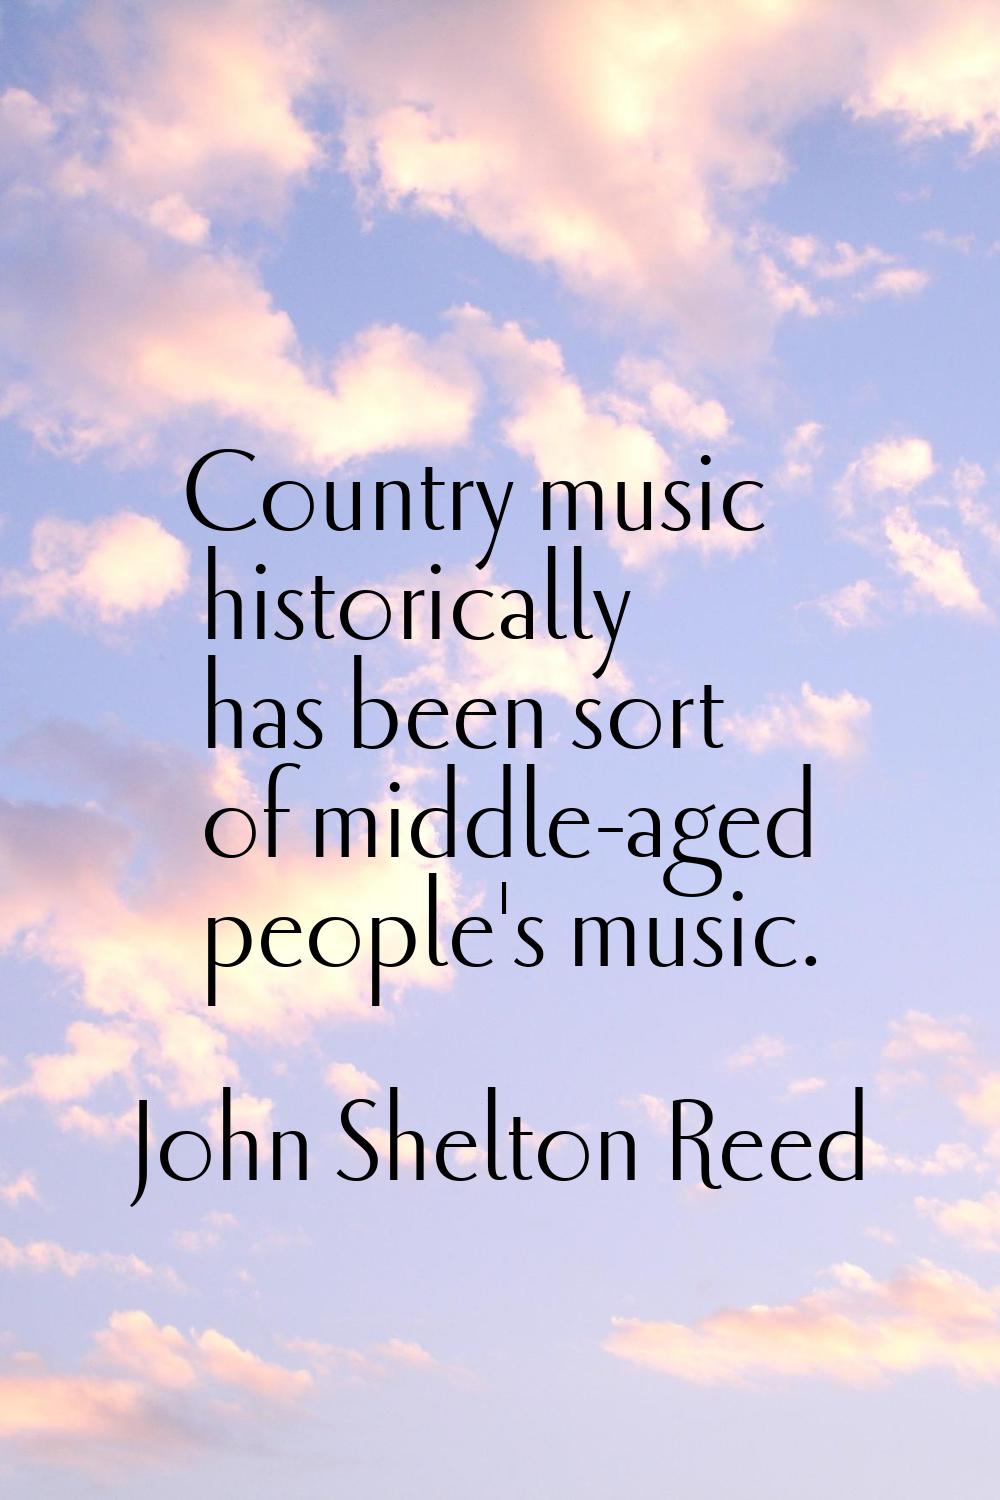 Country music historically has been sort of middle-aged people's music.